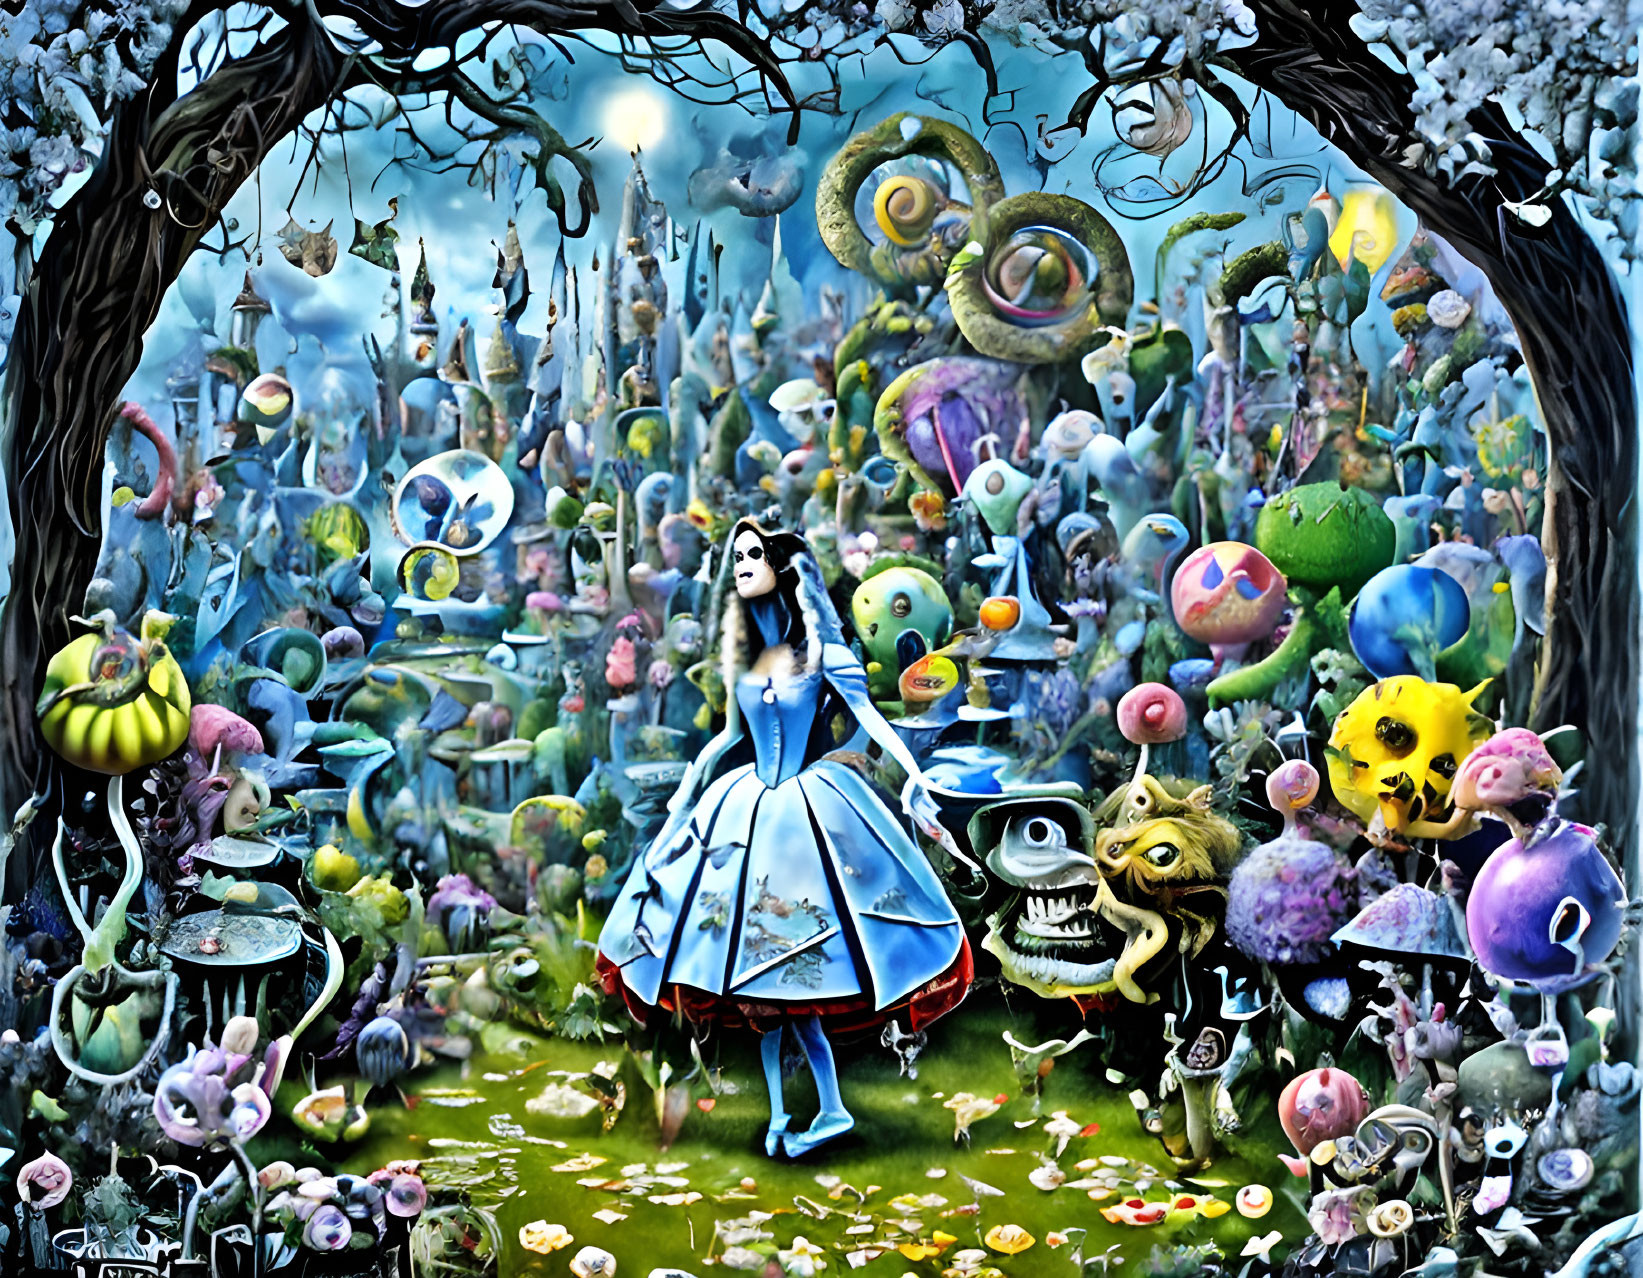 Fantasy scene with woman in blue dress surrounded by surreal creatures and orbs